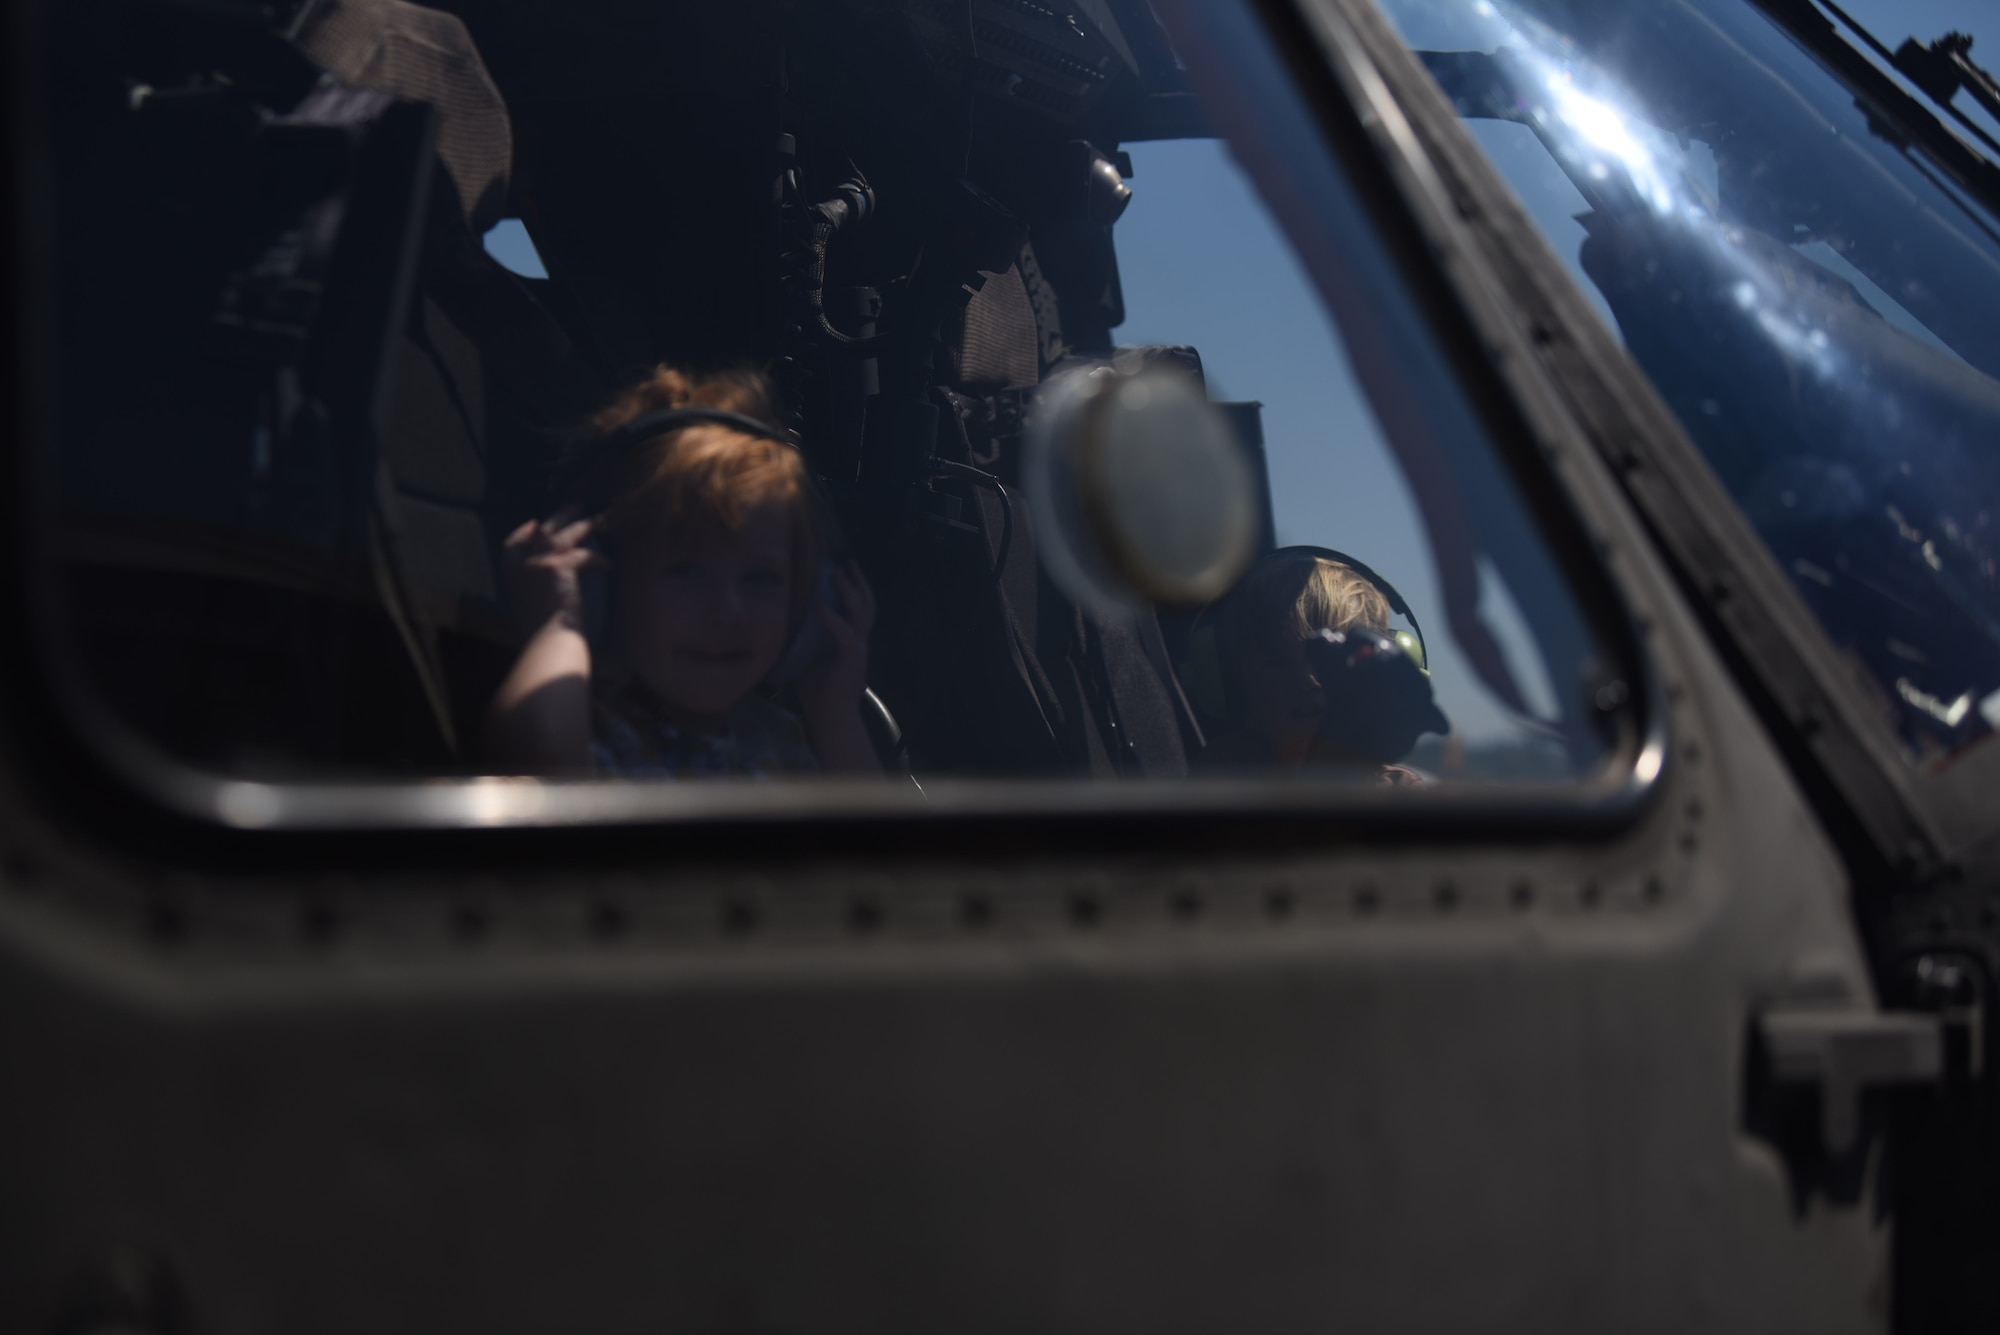 A child sits in a HH70L Blackhawk assigned to the Army National Guard Medical Evacuation Platform during the Meet Your Military event before the Joint Base Lewis-McChord Airshow and Warrior Expo at JBLM, Washington, July 14, 2023. The mission of the JAWE is to foster goodwill to educate and familiarize attendees with the people, mission, and equipment of the Air Force, Army, and other Armed Services while continuing to provide installation-wide mission support. (U.S. Air Force photo by Airman 1st Class Kylee Tyus)